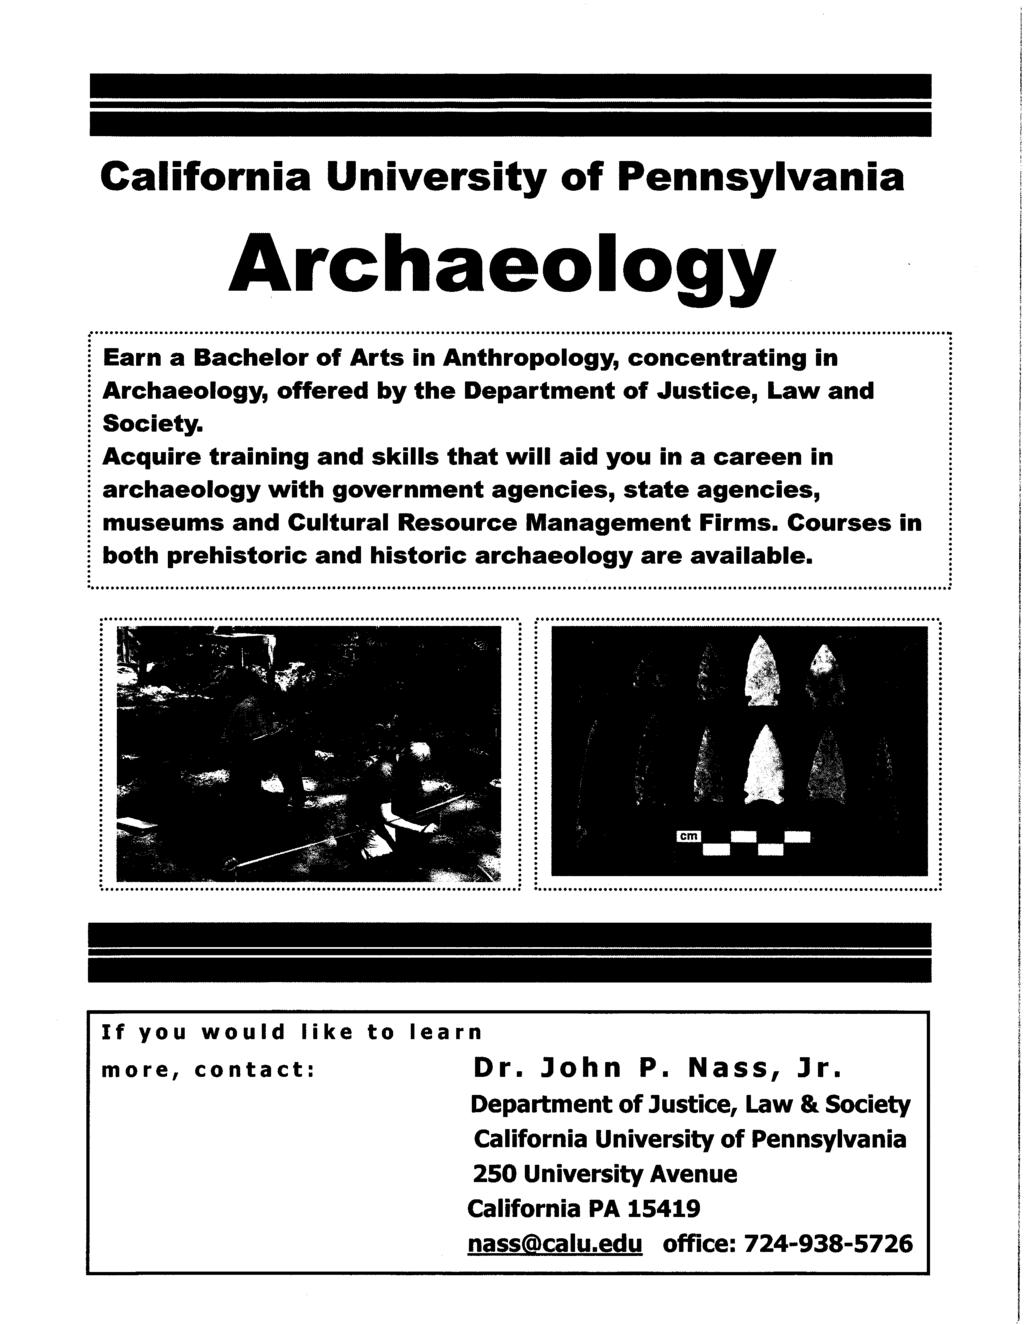 California University of Pennsylvania Archaeology Earn a Bachelor of Arts in Anthropology, concentrating in Archaeology, offered by the Department of Justice, Law and Society.